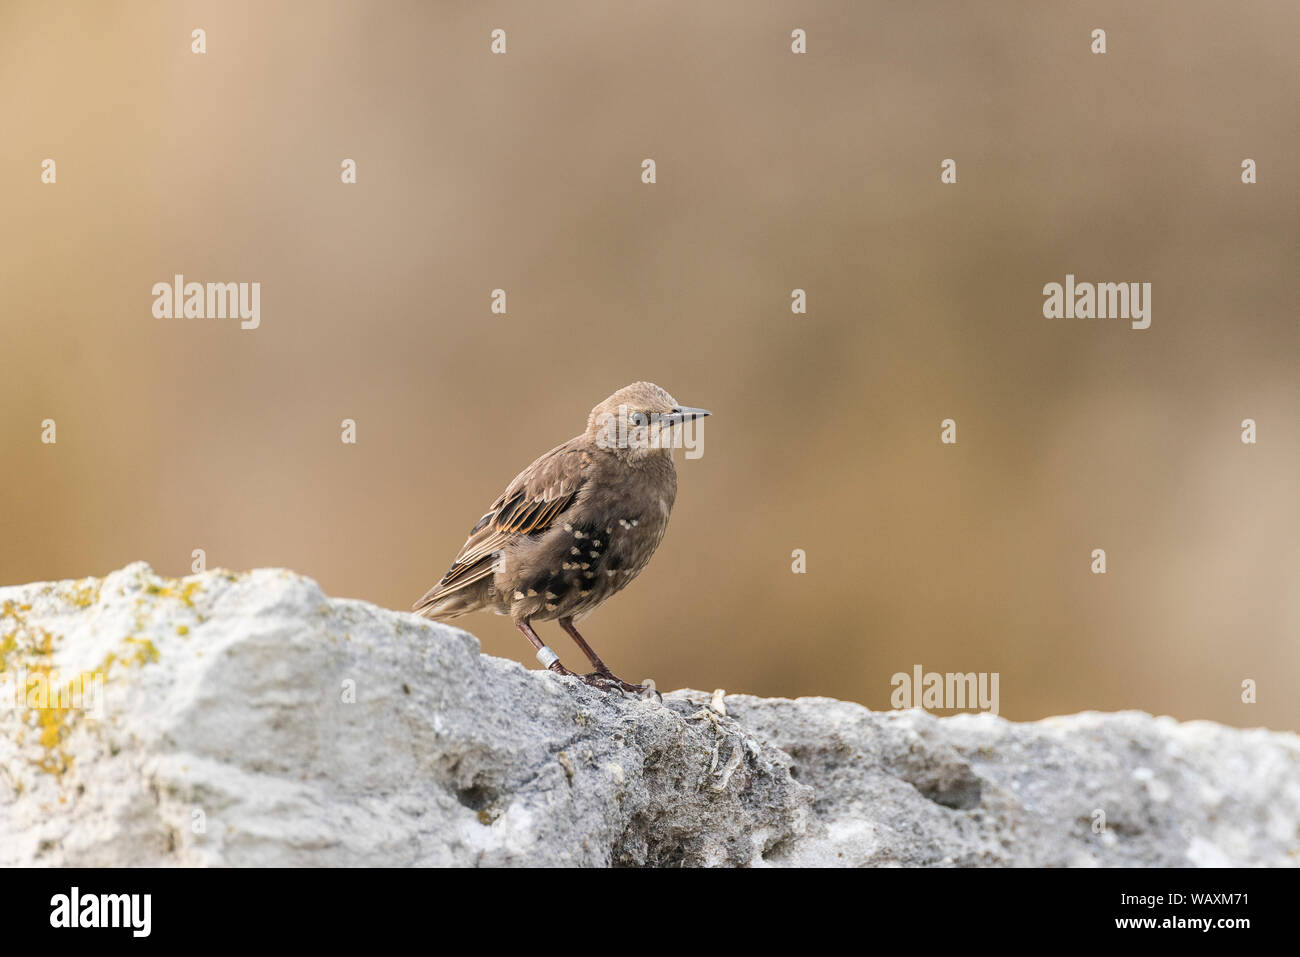 Juvenile starling on white boulder with a soft brown background. Stock Photo